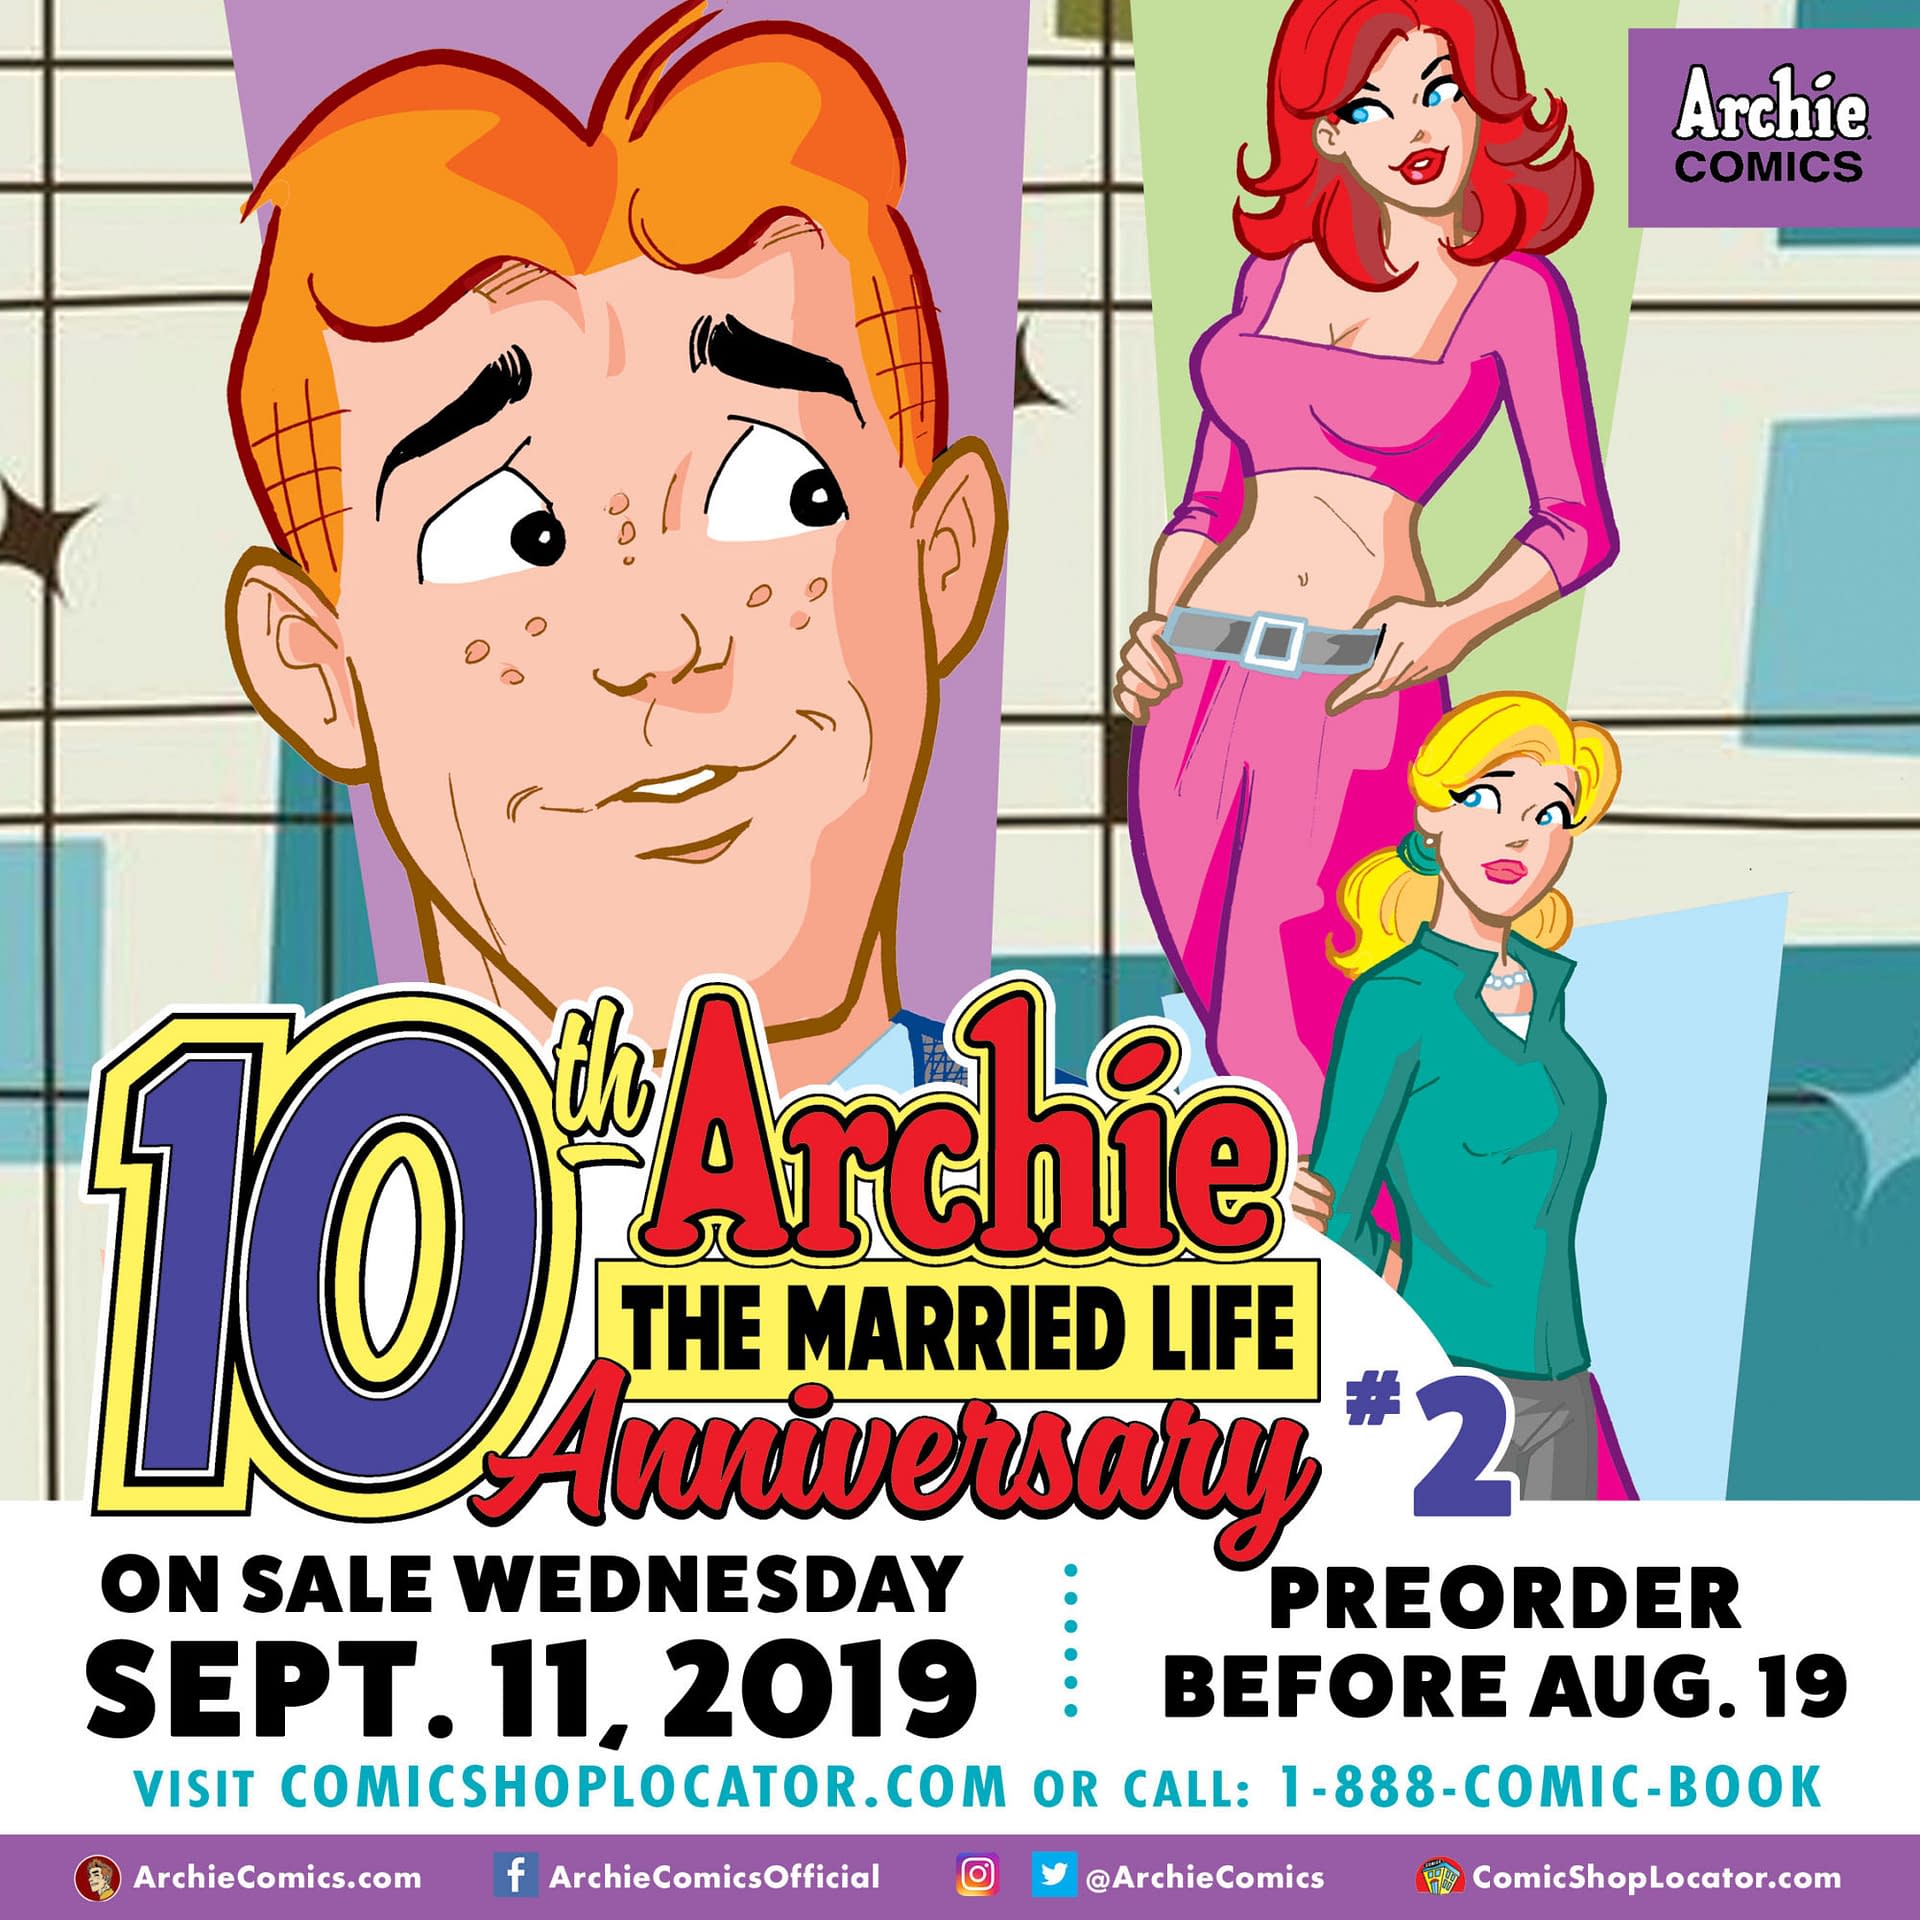 Will Moose Mason Support the Green New Deal? Previews of Archie: Married Life 10th Anniversary #2 and Sabrina #5